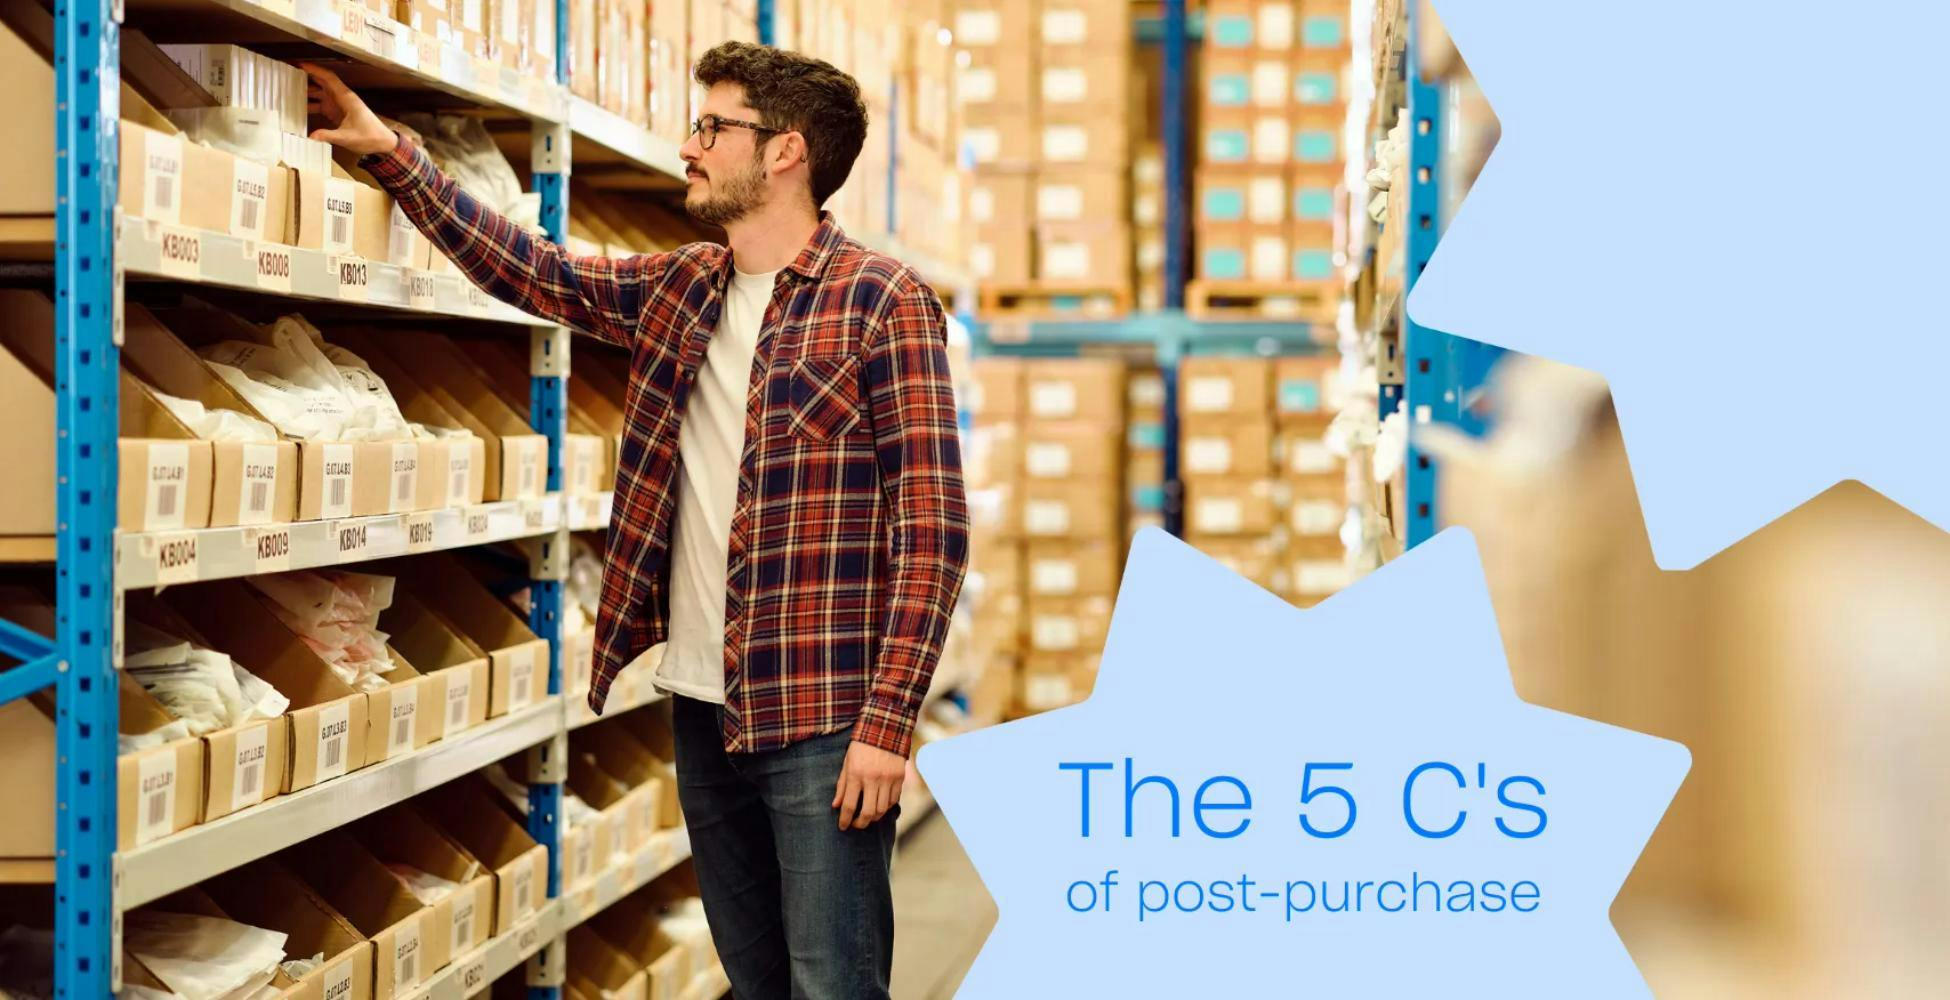 The 5'Cs of post purchase